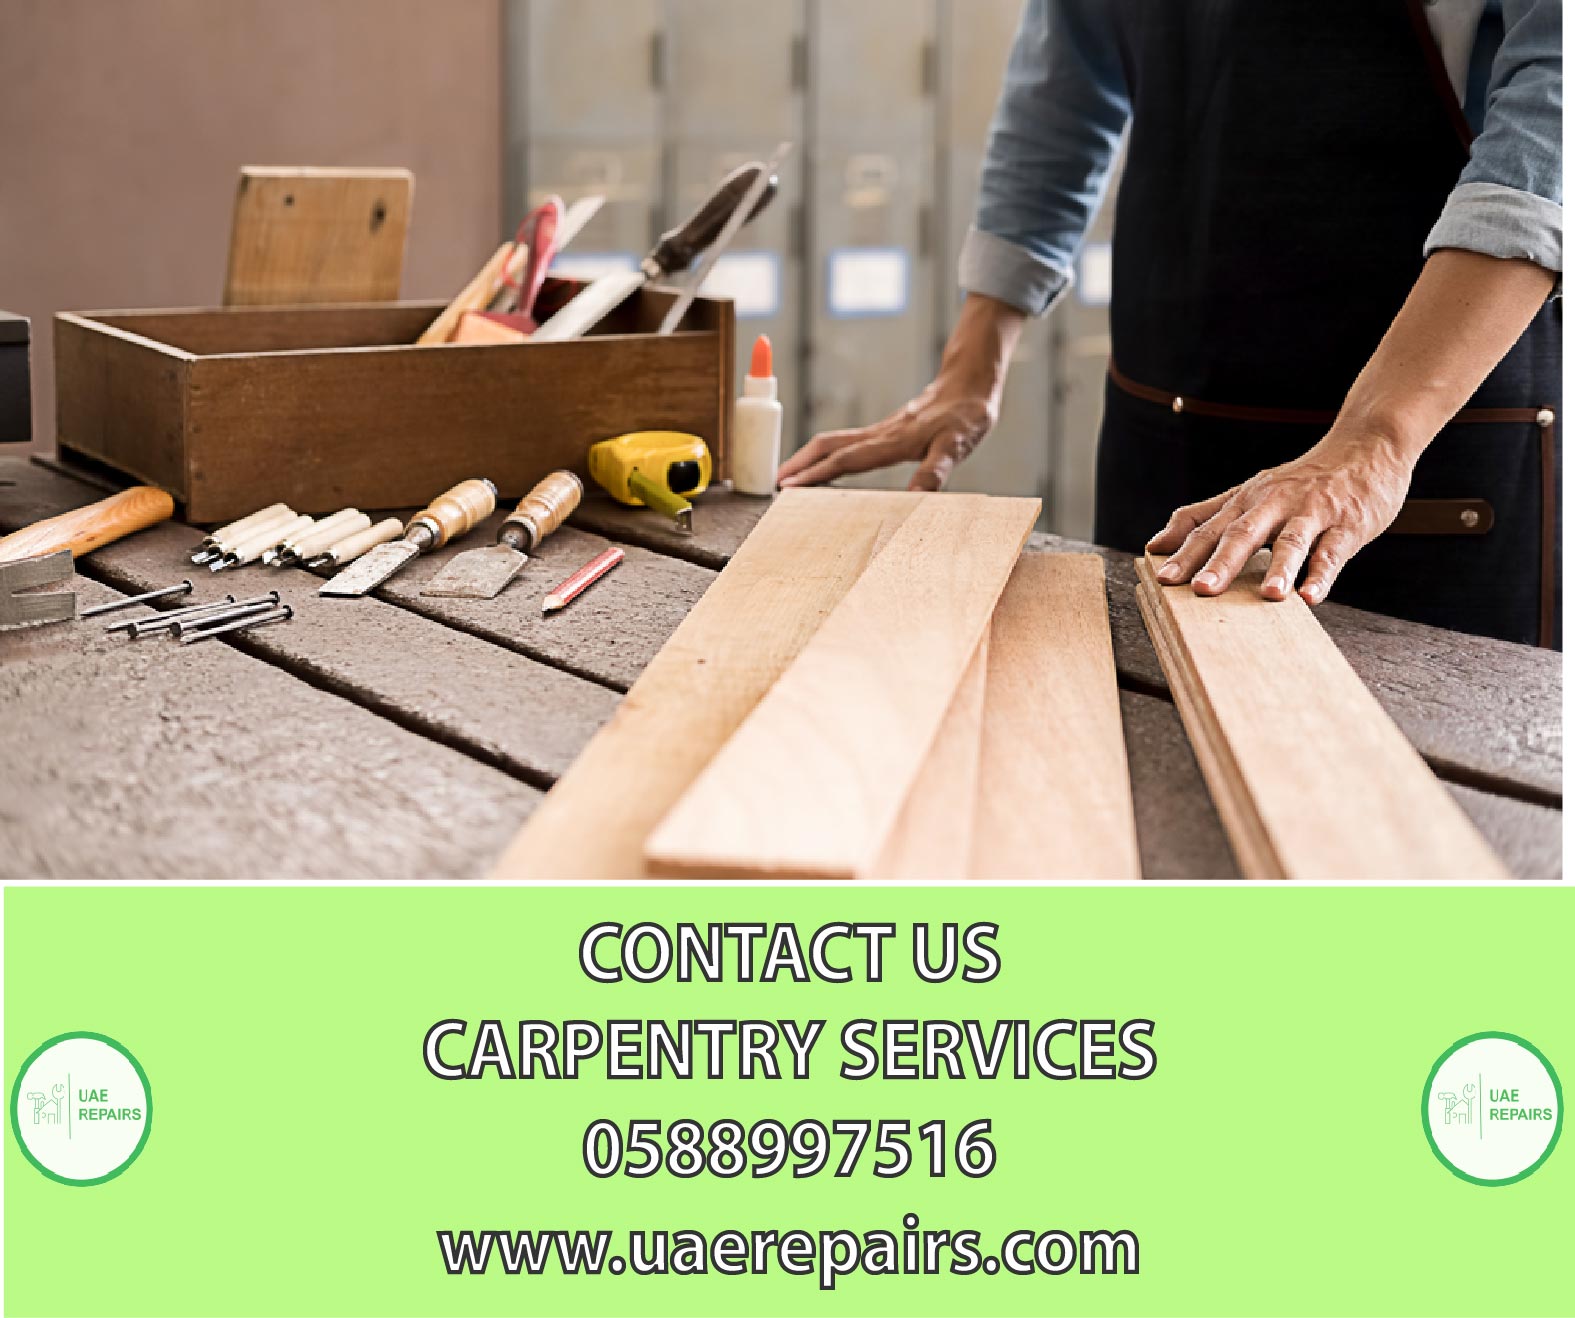 CONTACT US FOR CARPENTRY SERIVCE IN UAE 0588997516